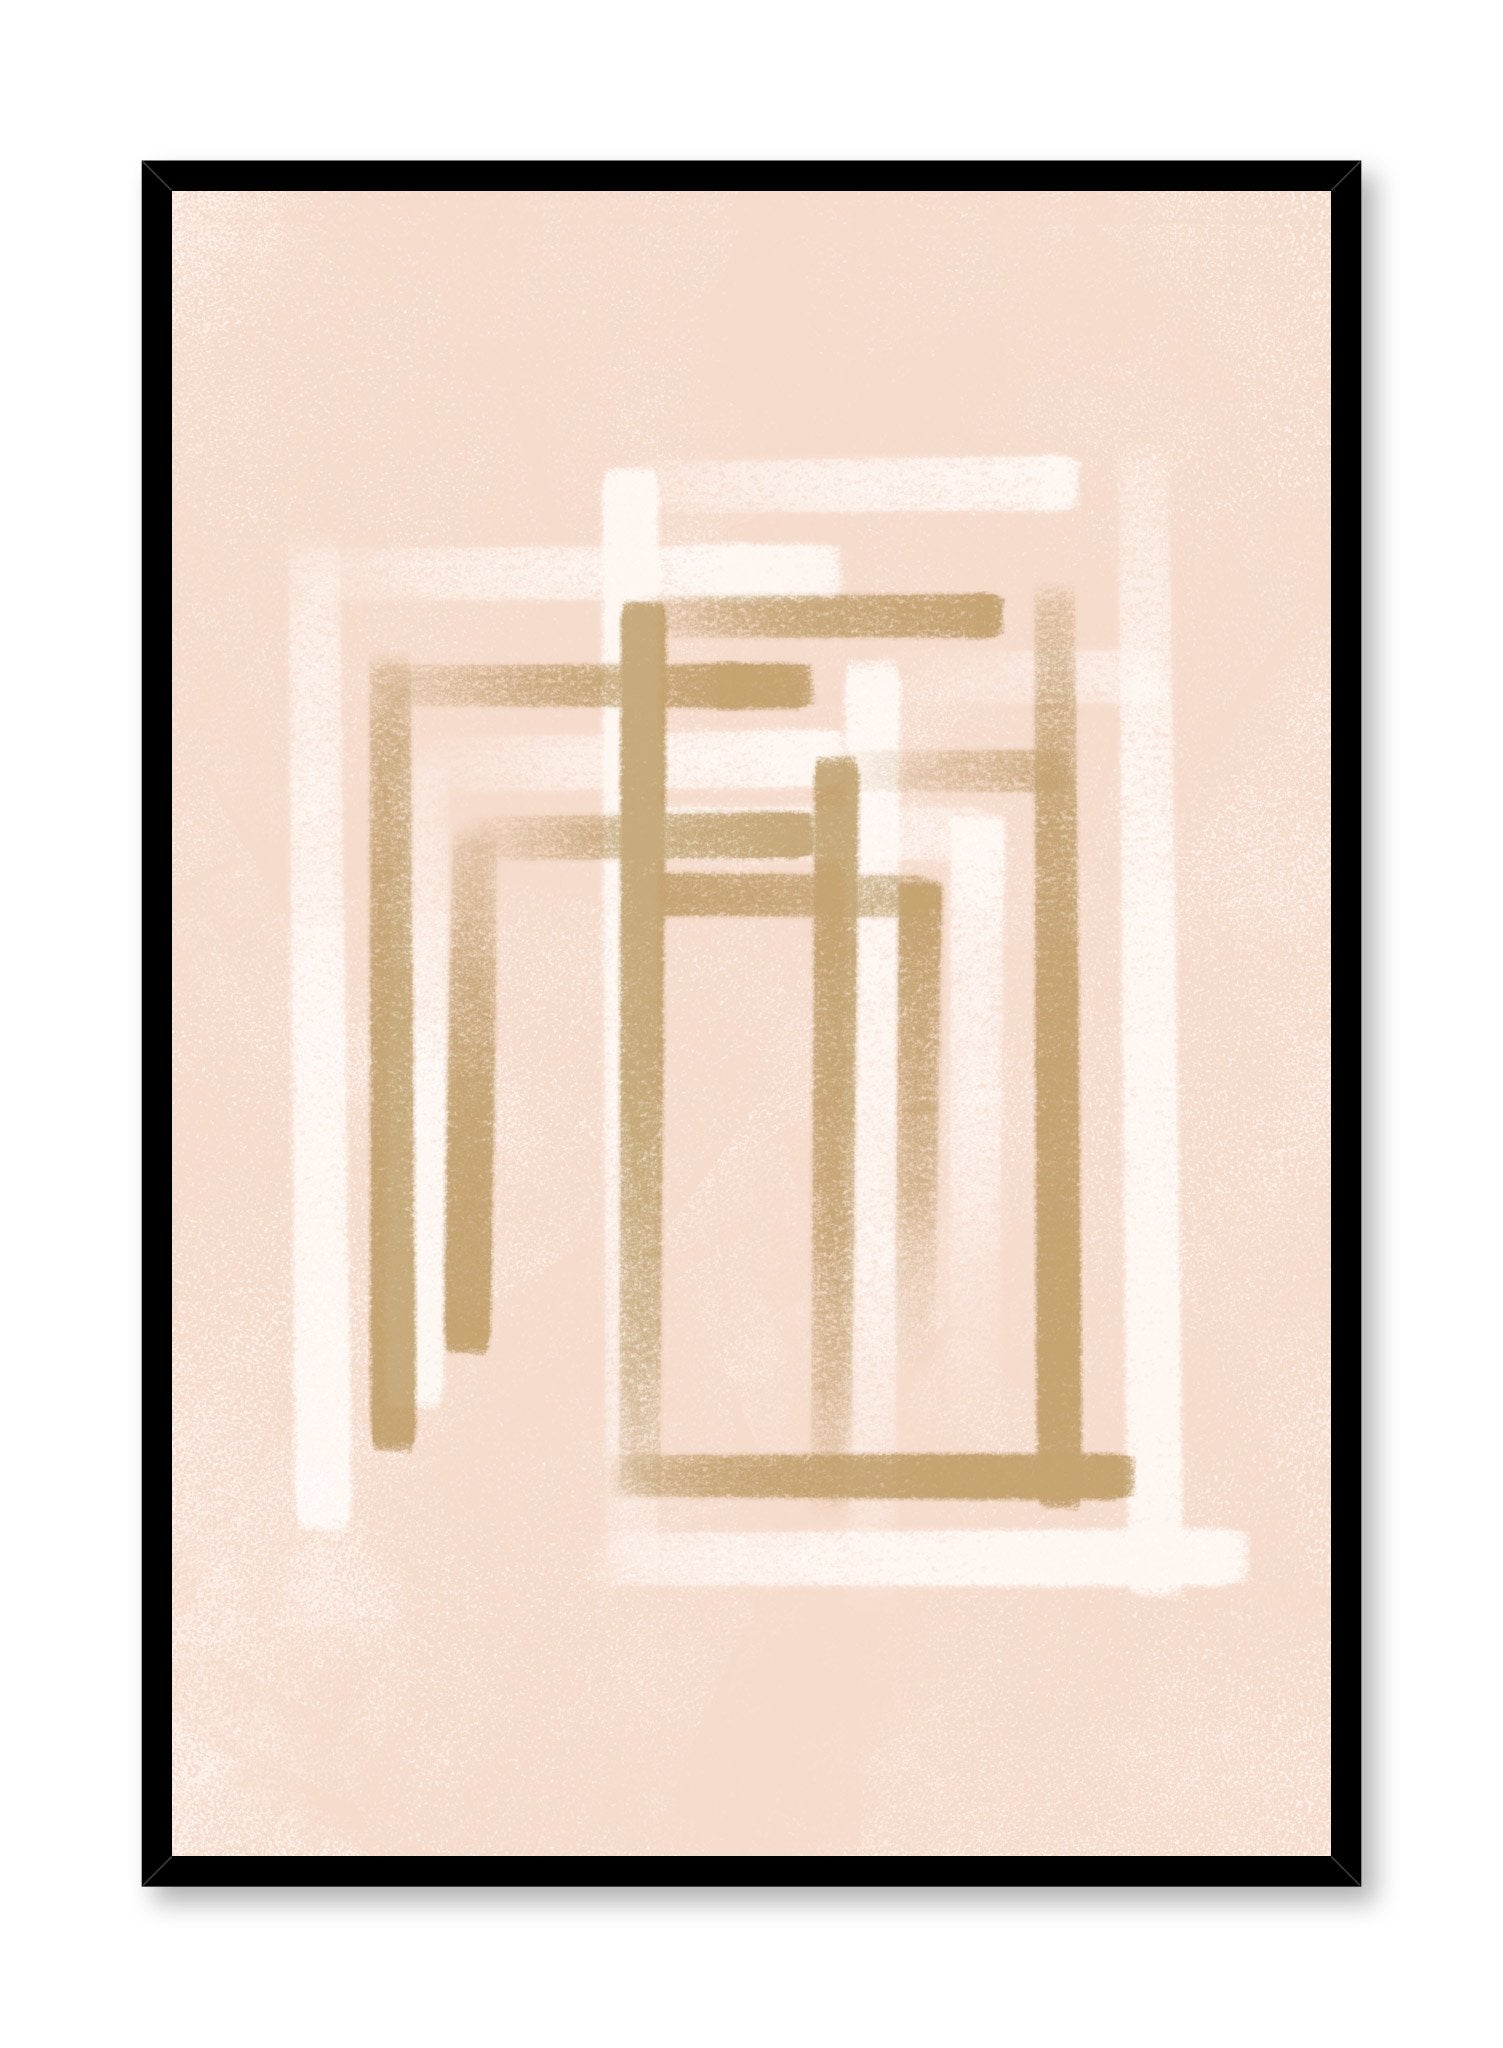 Modern minimalist poster by Opposite Wall with abstract illustration of white and beige colour lines